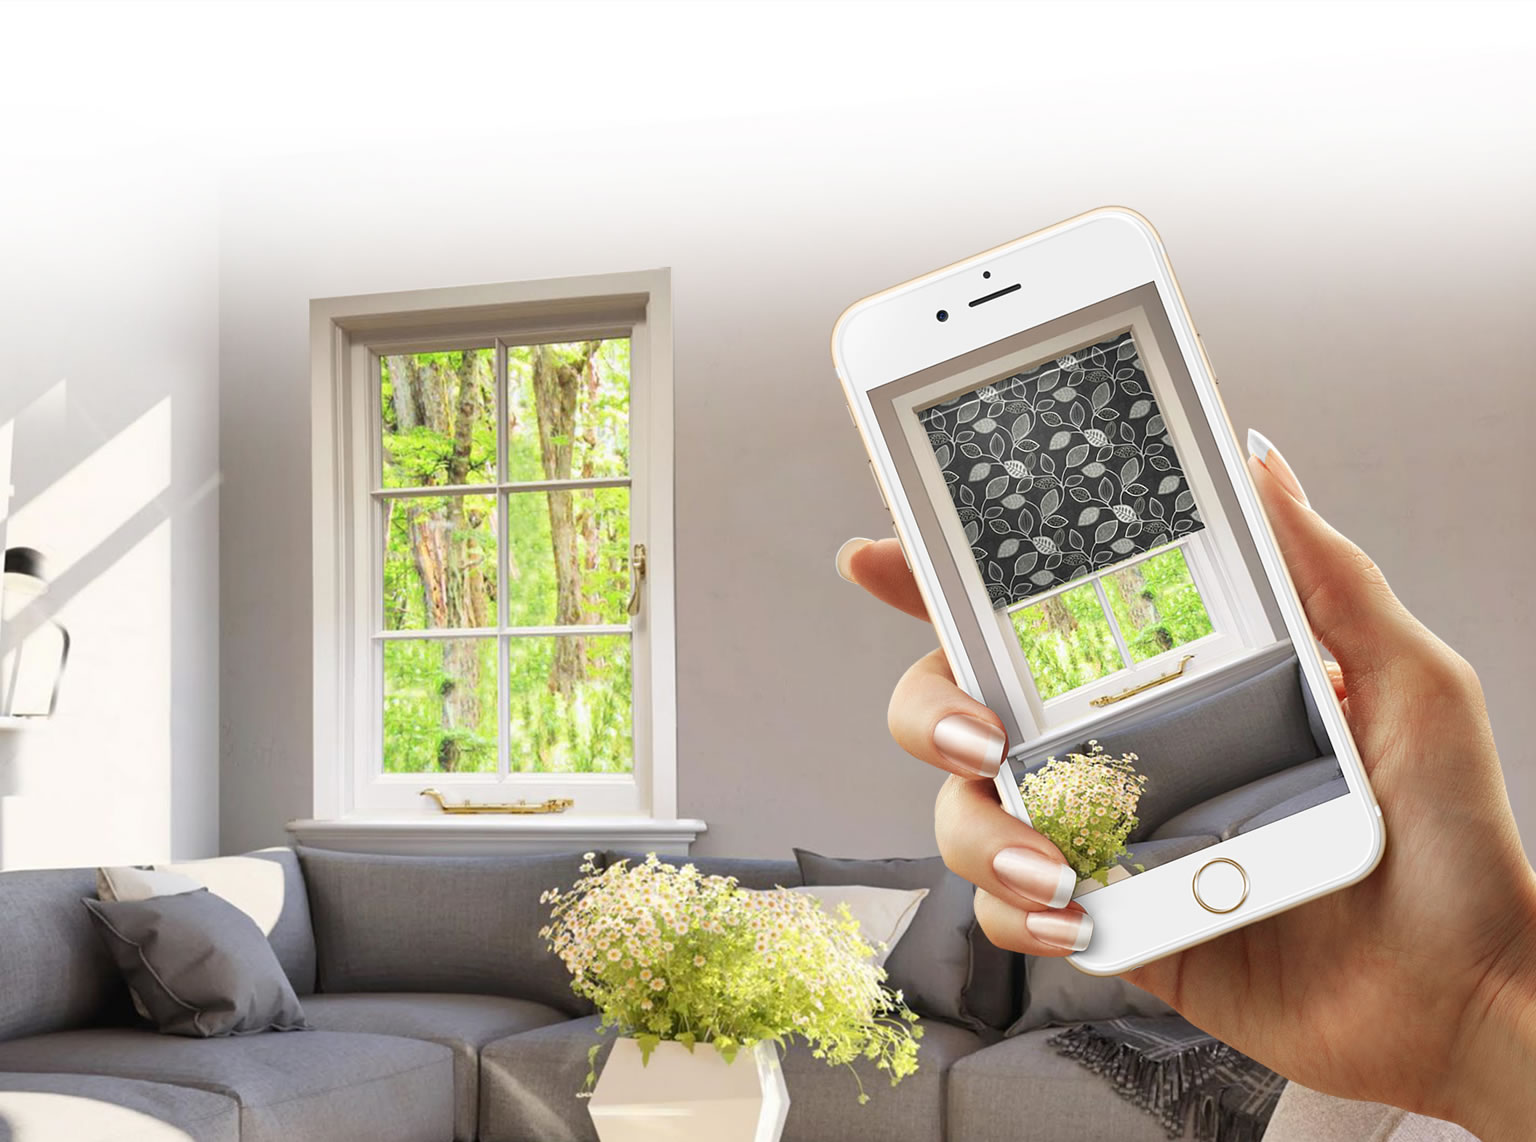 Terrys Fabrics launch Window Planner App that uses augmented reality to visualise products within your own home @terrysfabrics